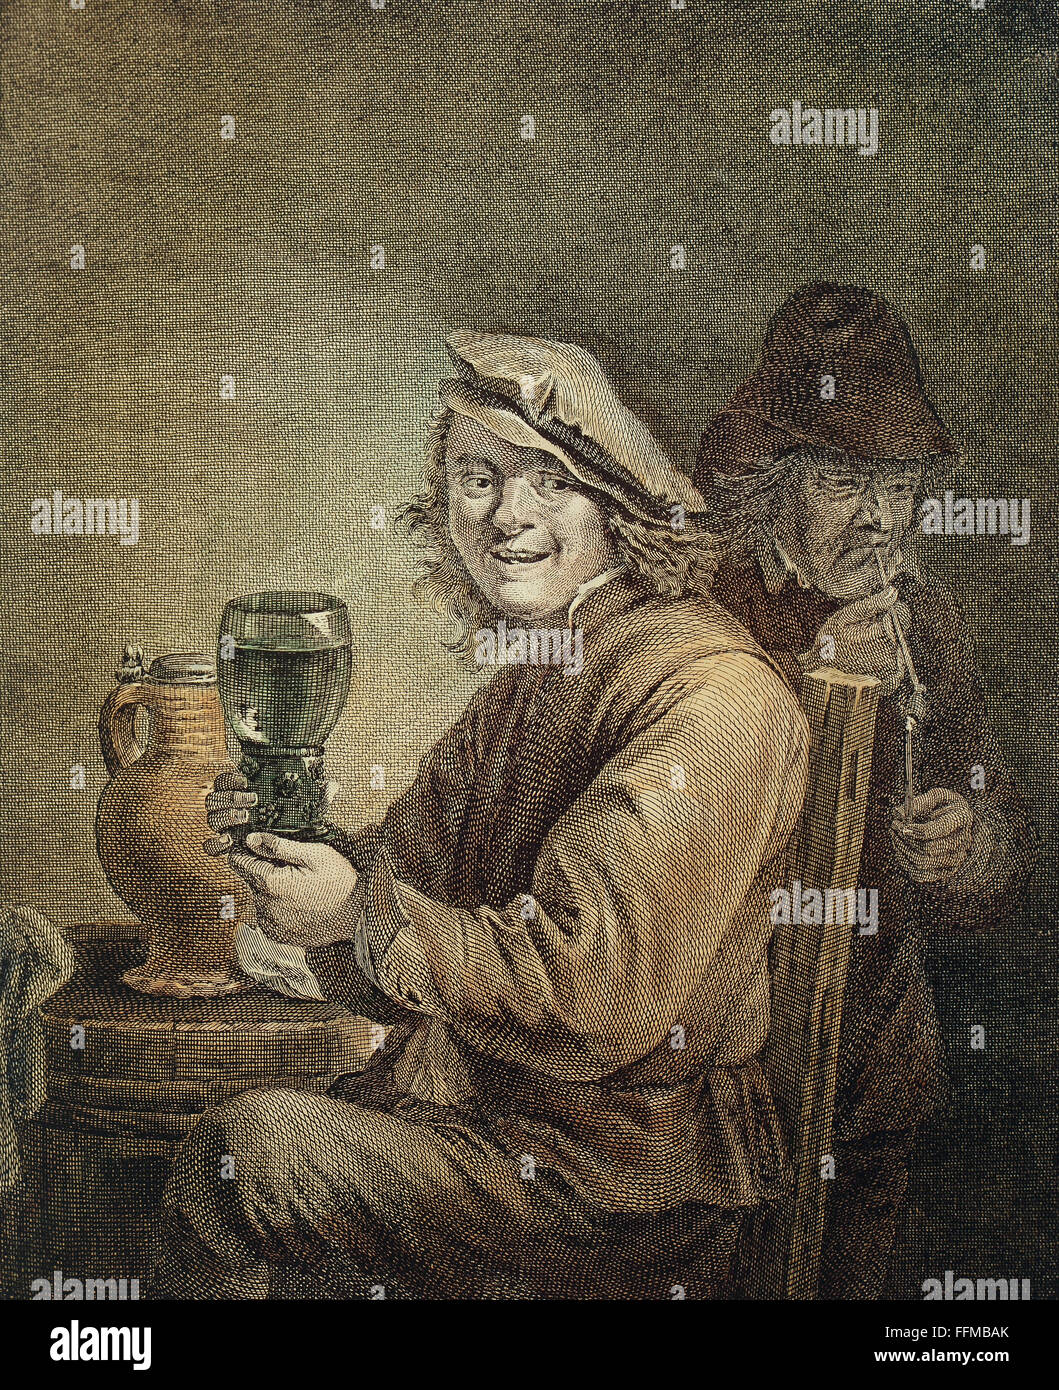 alcohol, grape vine, 'At the inn, Flemish peasant with wine glass', after painting by David Teniers the Younger (1610 - 1690), coloured copper engraving by Pierre Chenu (1730 - um 1800), 23,5 x 19 cm, 18th century, private collection, Artist's Copyright has not to be cleared Stock Photo